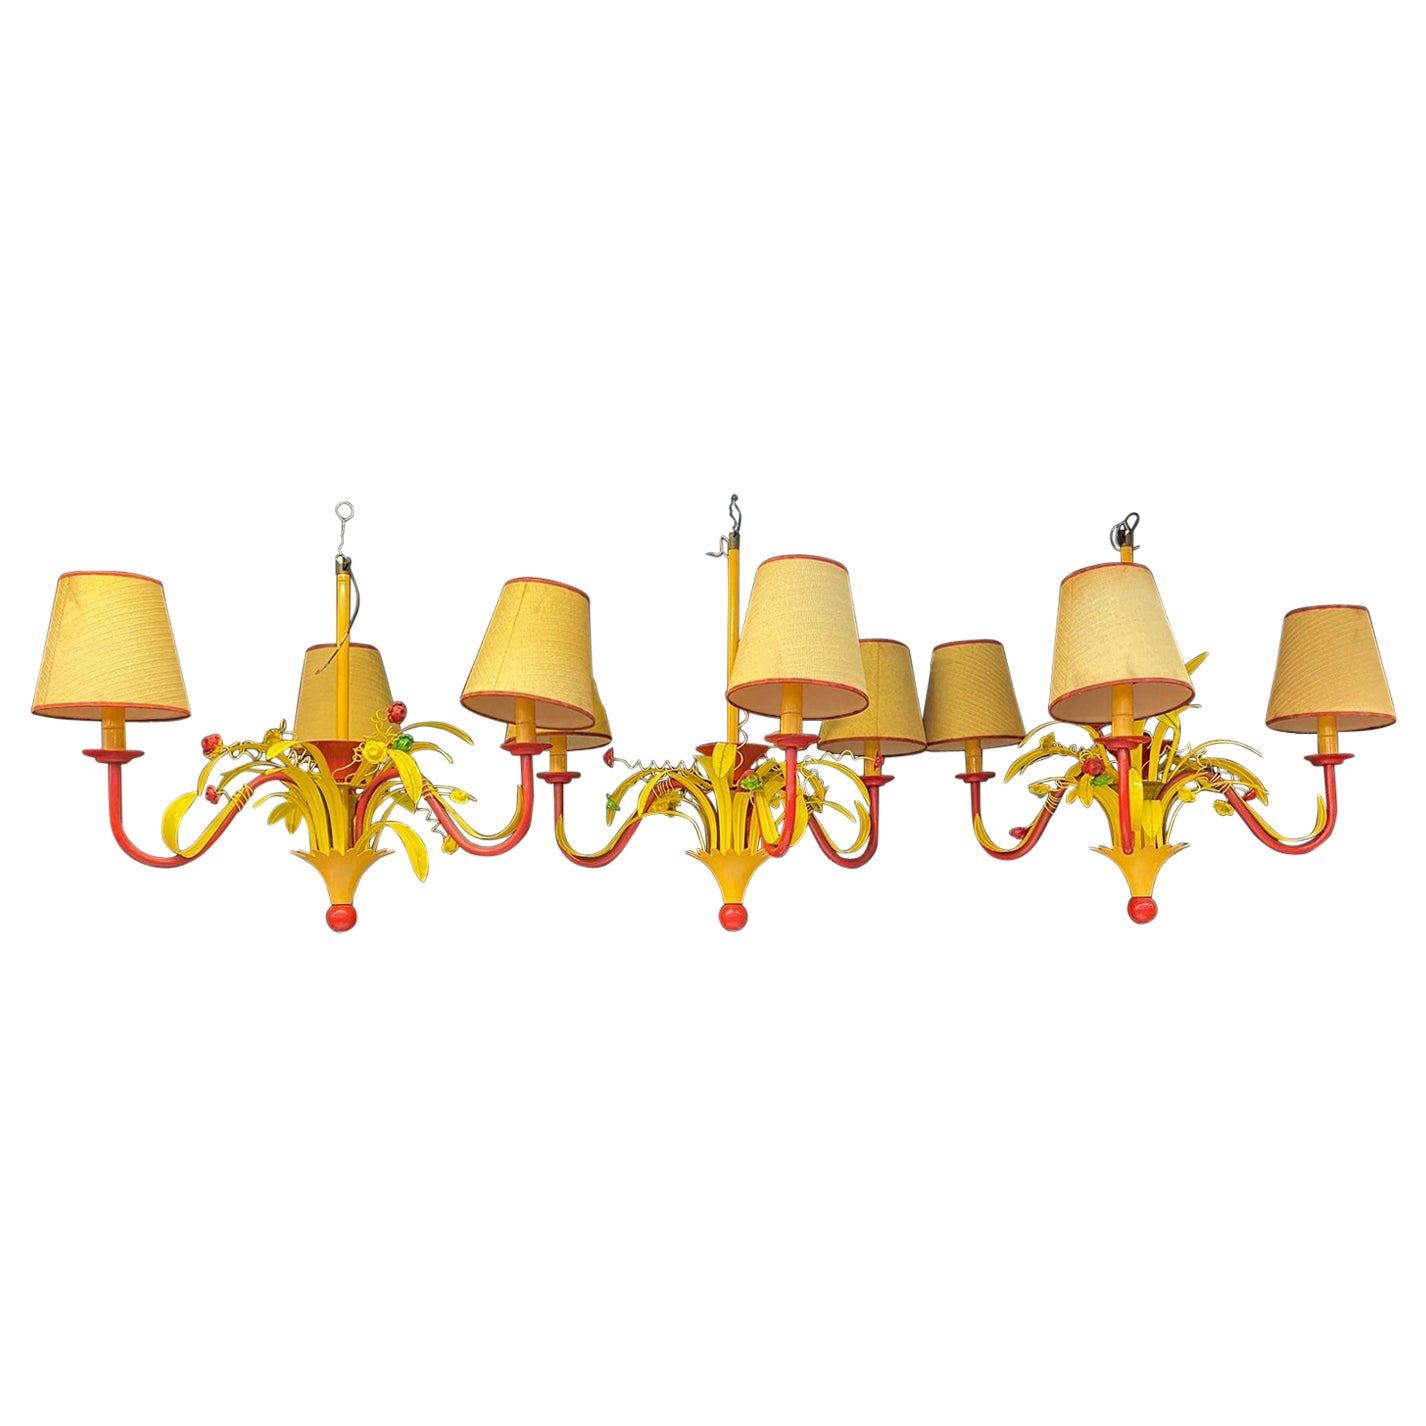 3 Circus Chandeliers in Lacquered Metal, circa 1970 For Sale